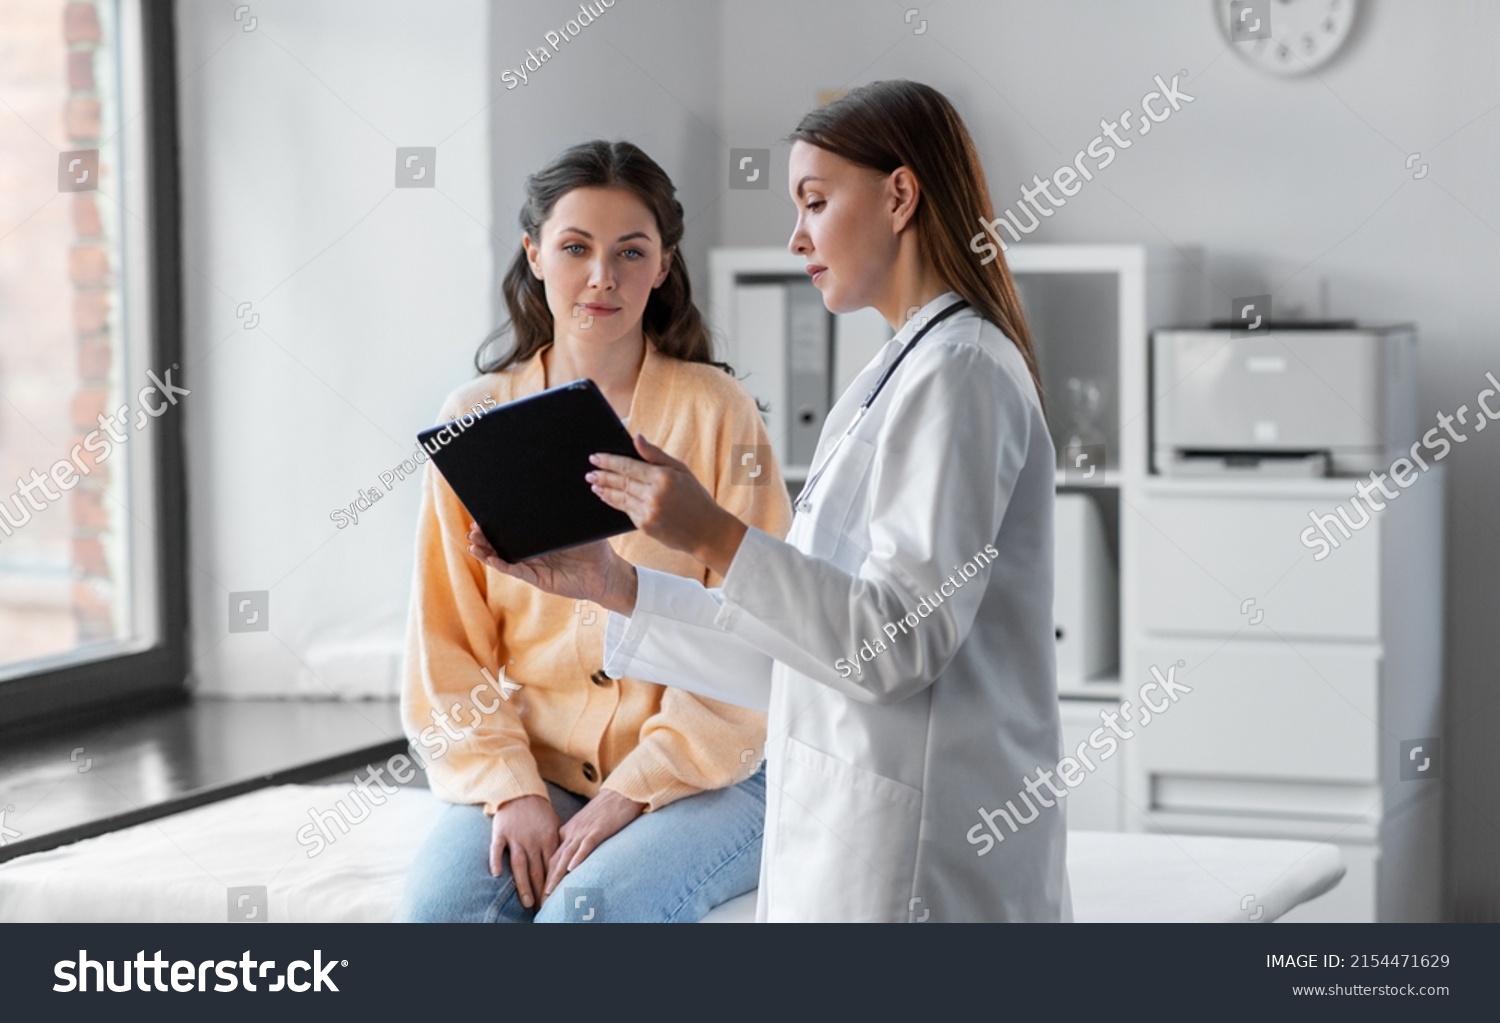 medicine, healthcare and people concept - female doctor with tablet pc computer talking to woman patient at hospital #2154471629